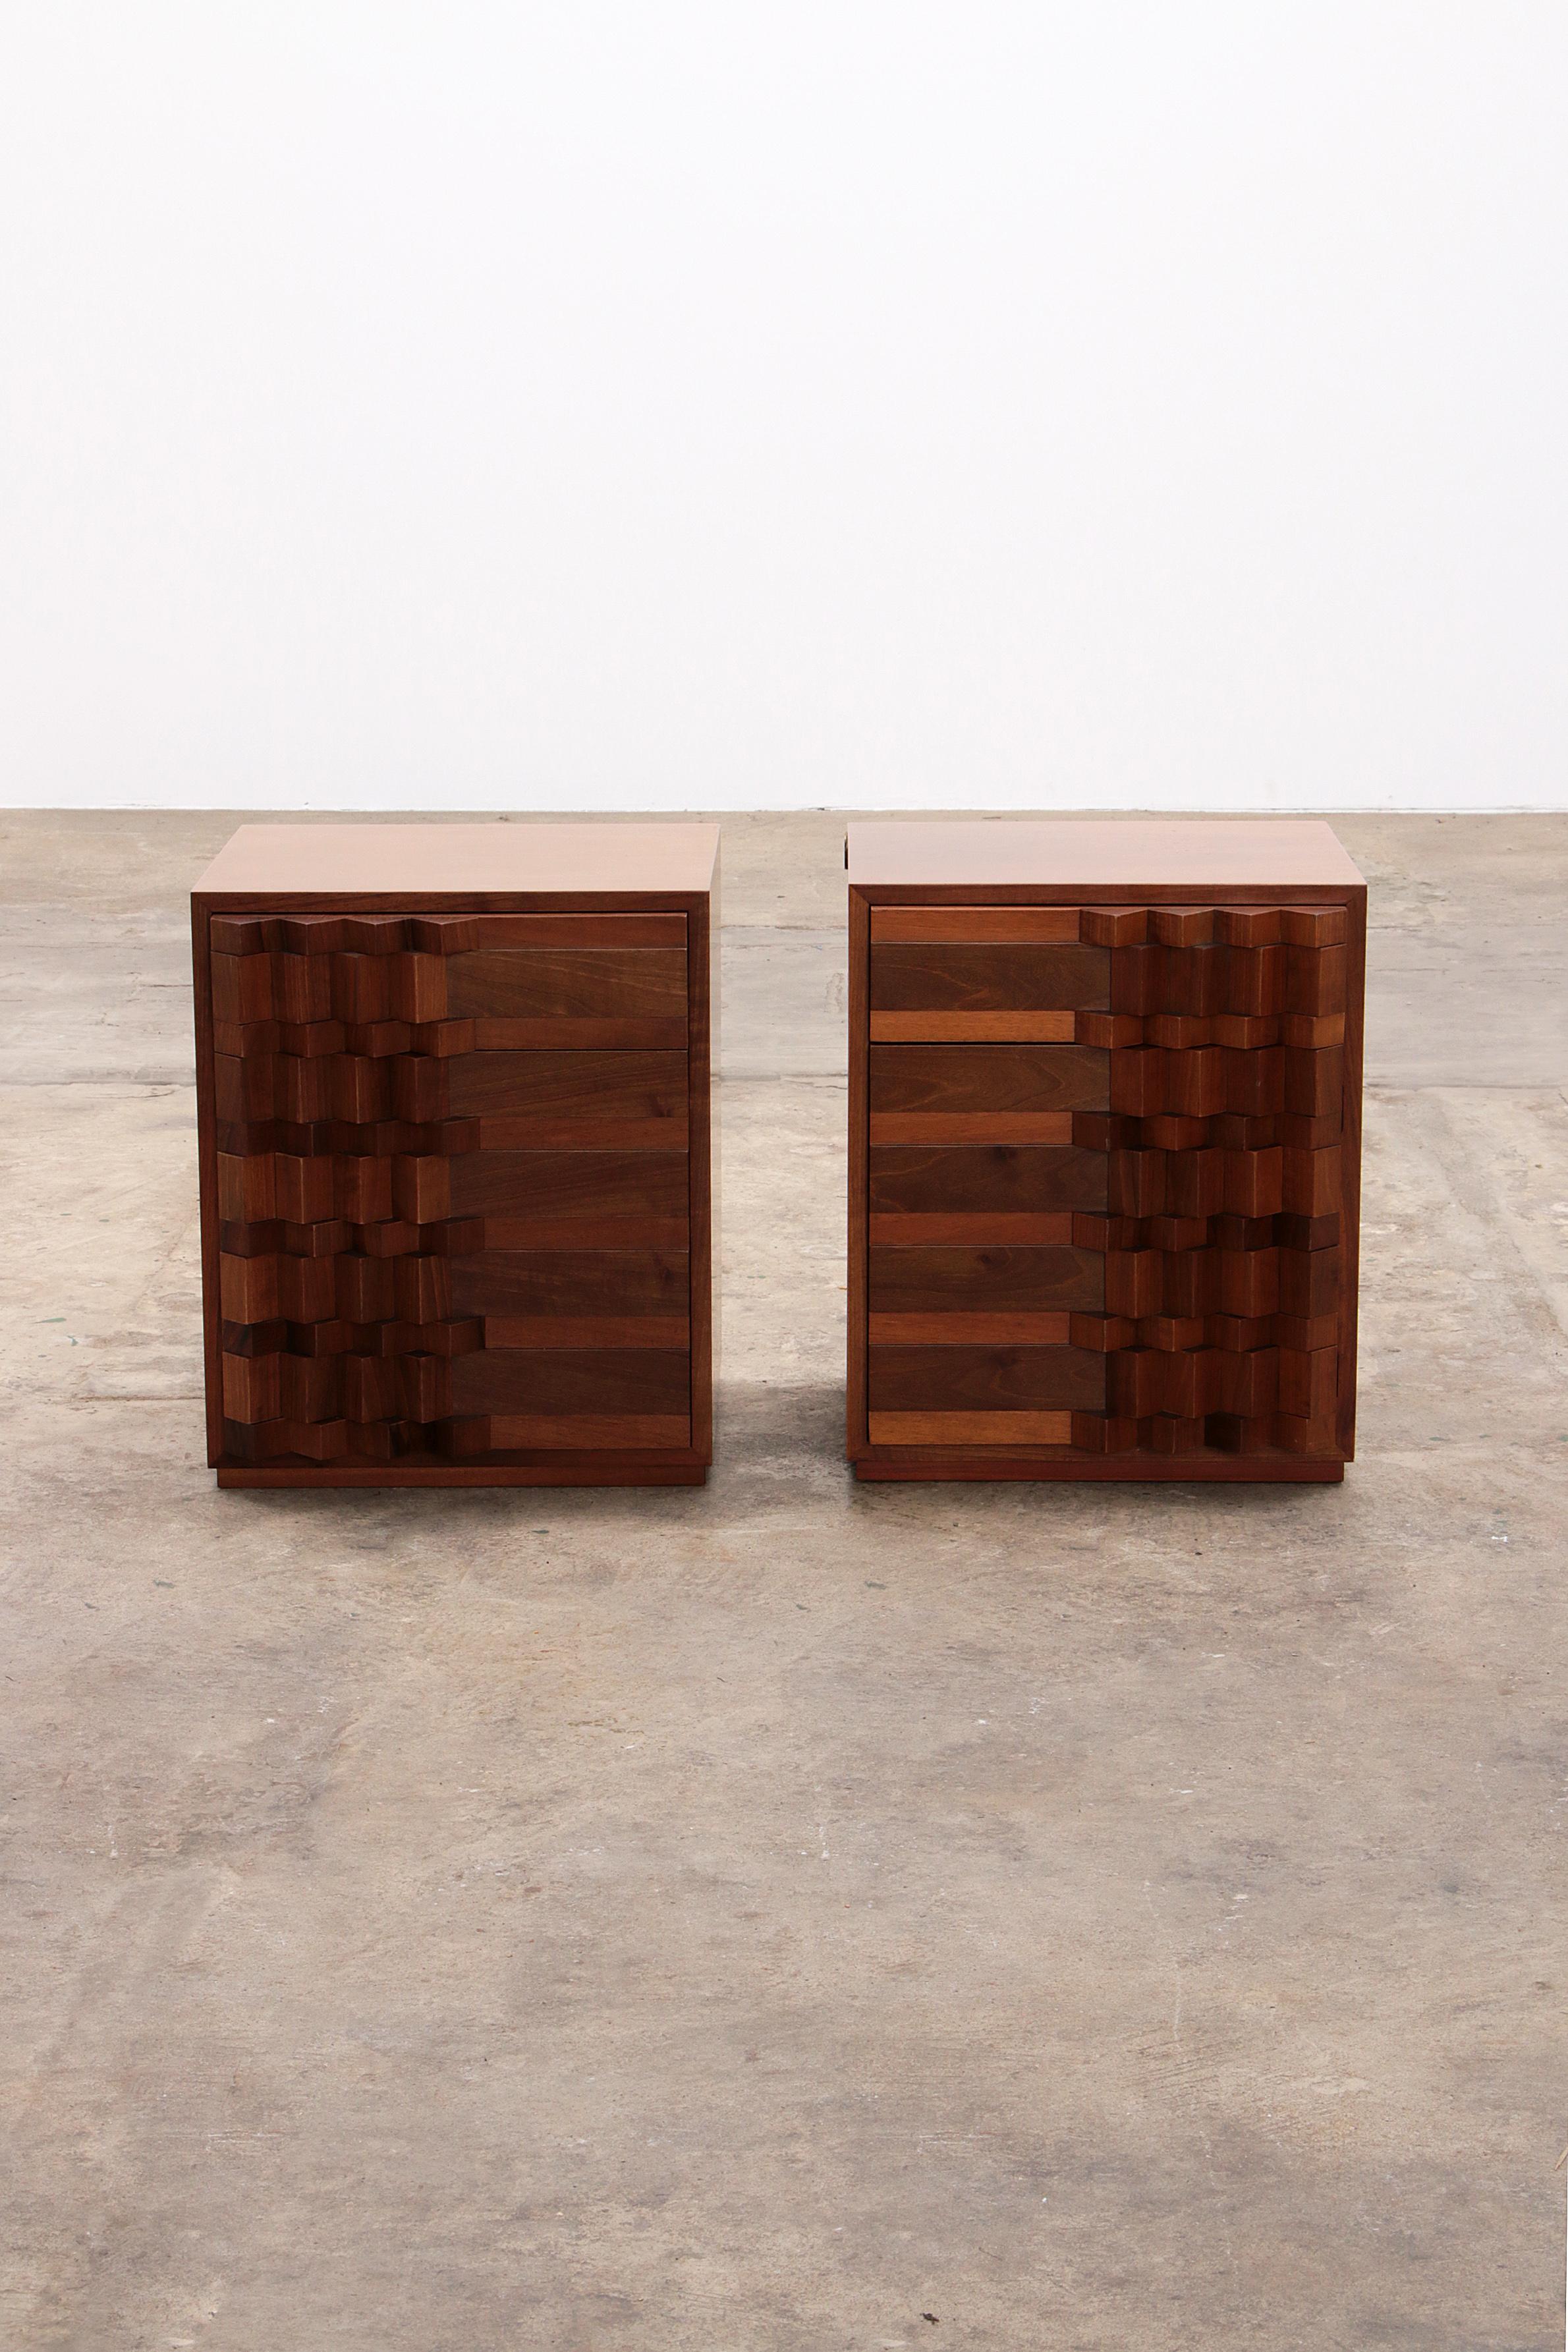 uciano Frigerio Set of 2 bedside tables 1970

Beautiful pair of bedside tables with graphic doors designed and manufactured by Luciano Frigerio, Italy 1970. These bedside tables are made of brown glossy lacquered wood. The graphic doors are